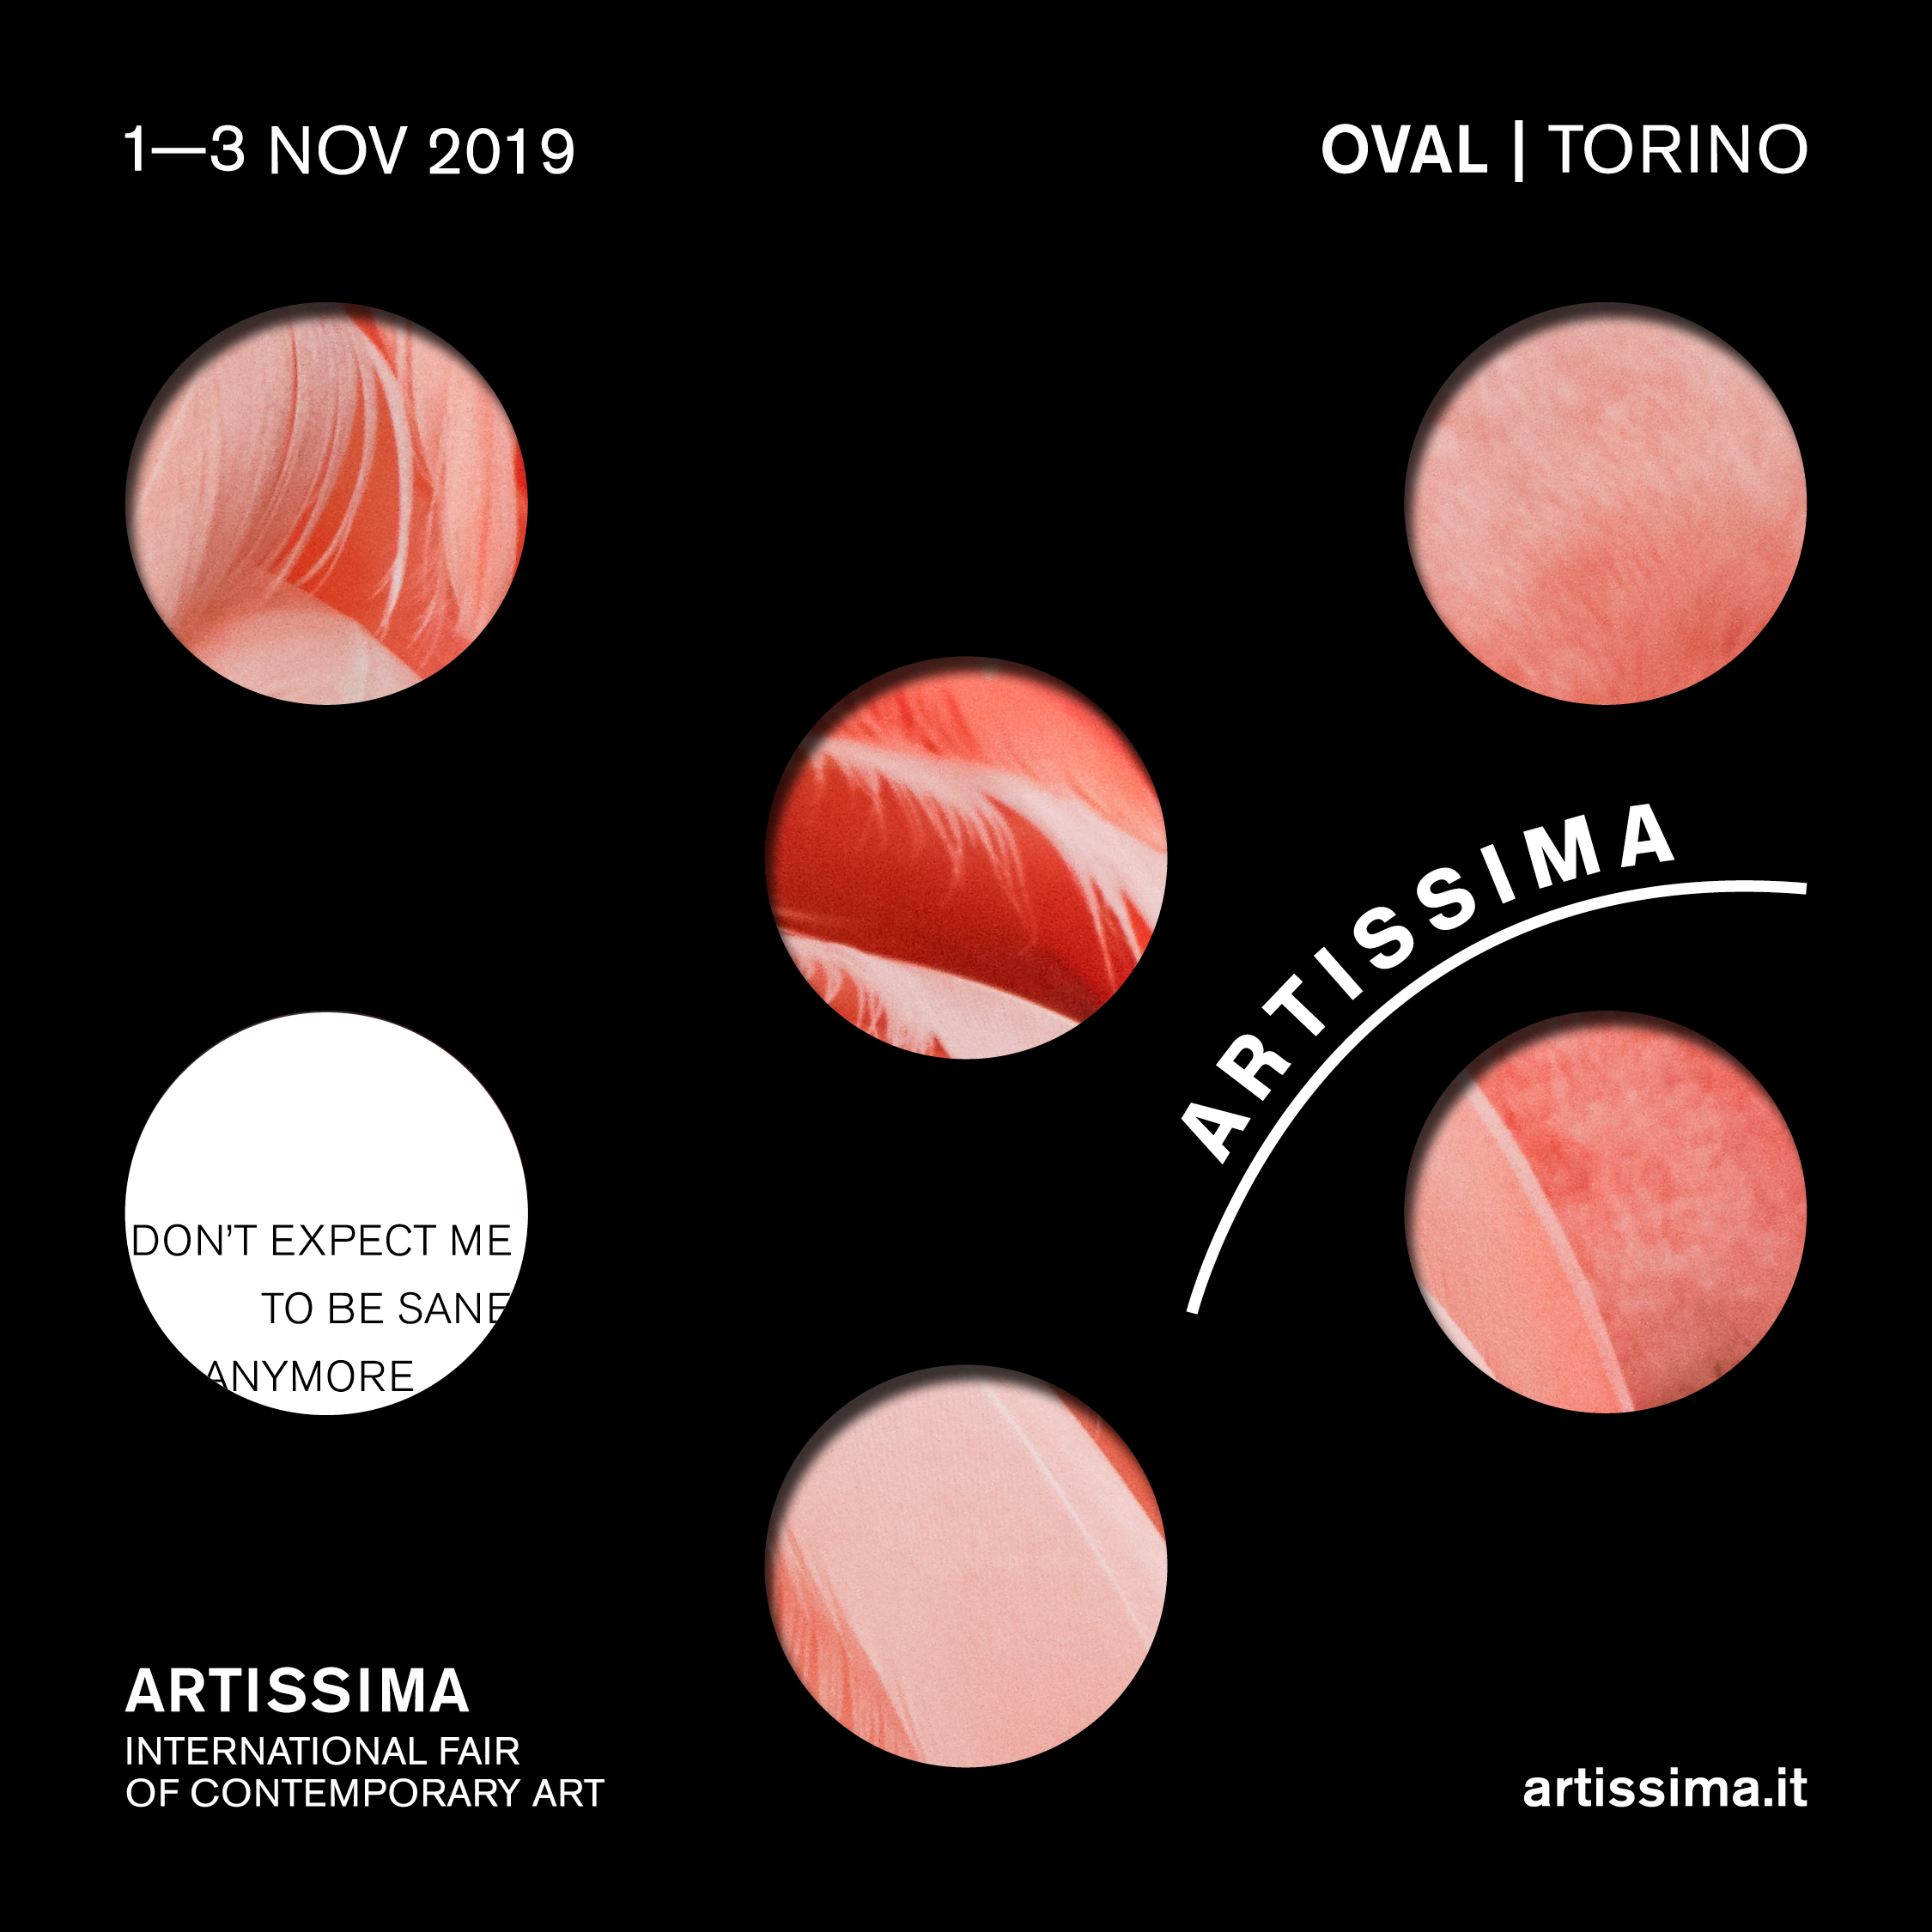 Artissima 2019 @ Oval Olympic Arena